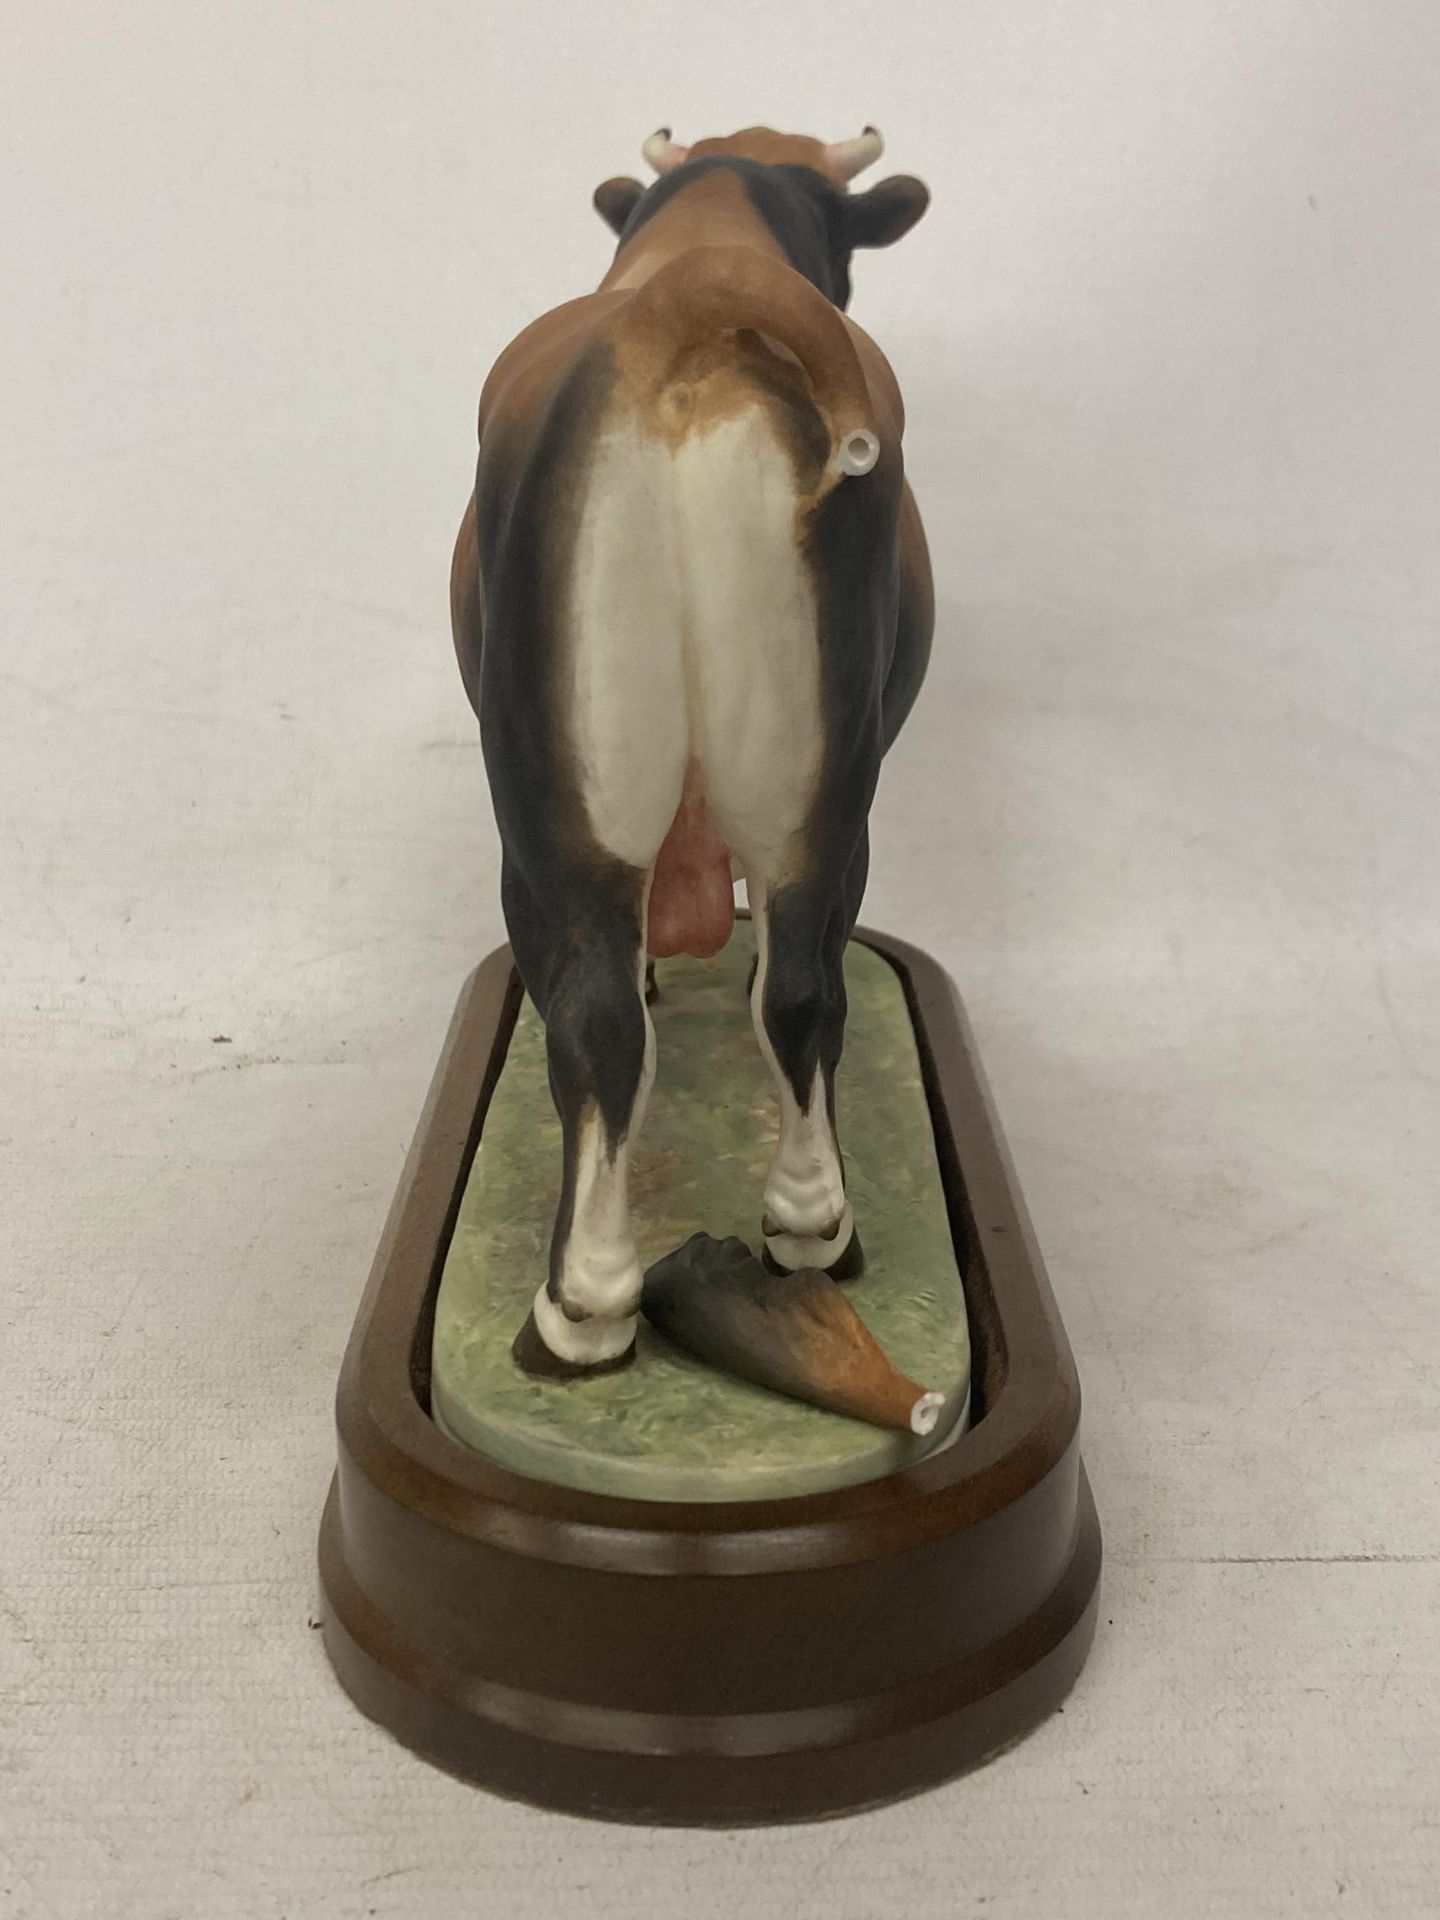 A ROYAL WORCESTER MODEL OF A JERSEY BULL MODELLED BY DORIS LINDNER PRODUCED IN A LIMITED EDITION - Image 4 of 5